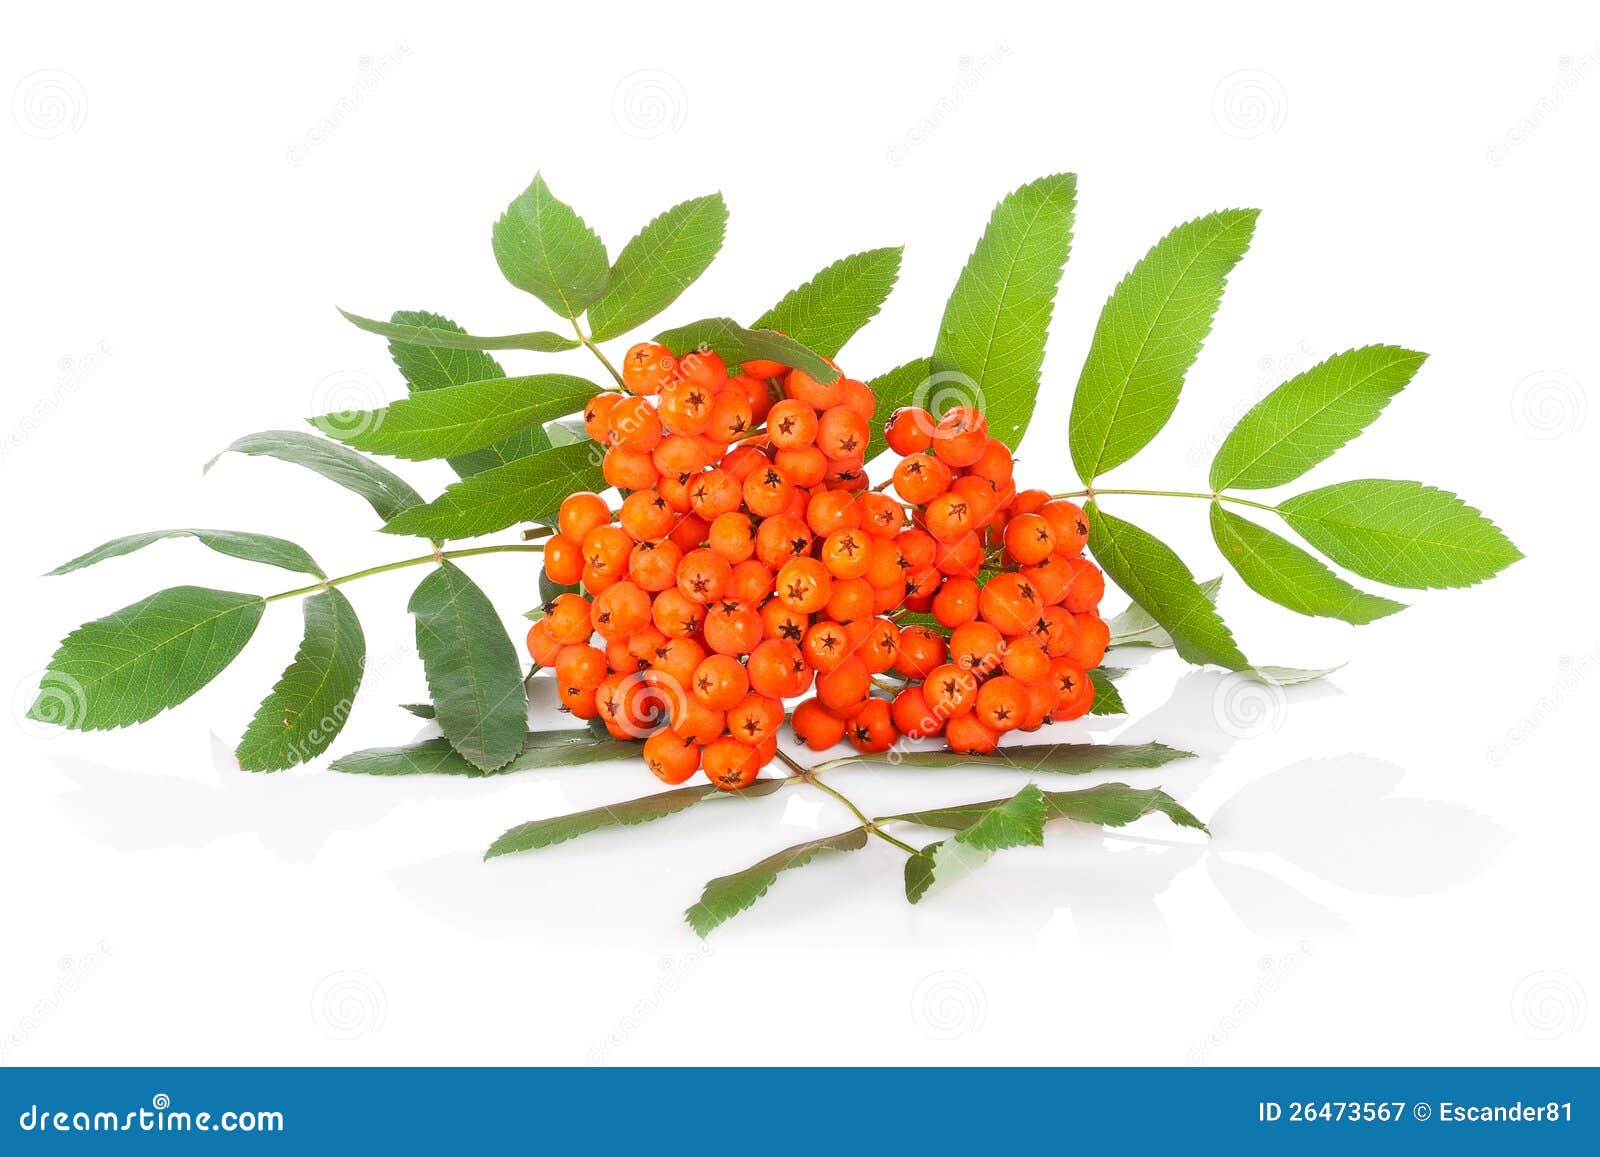 Ashberry isolated on white stock image. Image of natural - 26473567